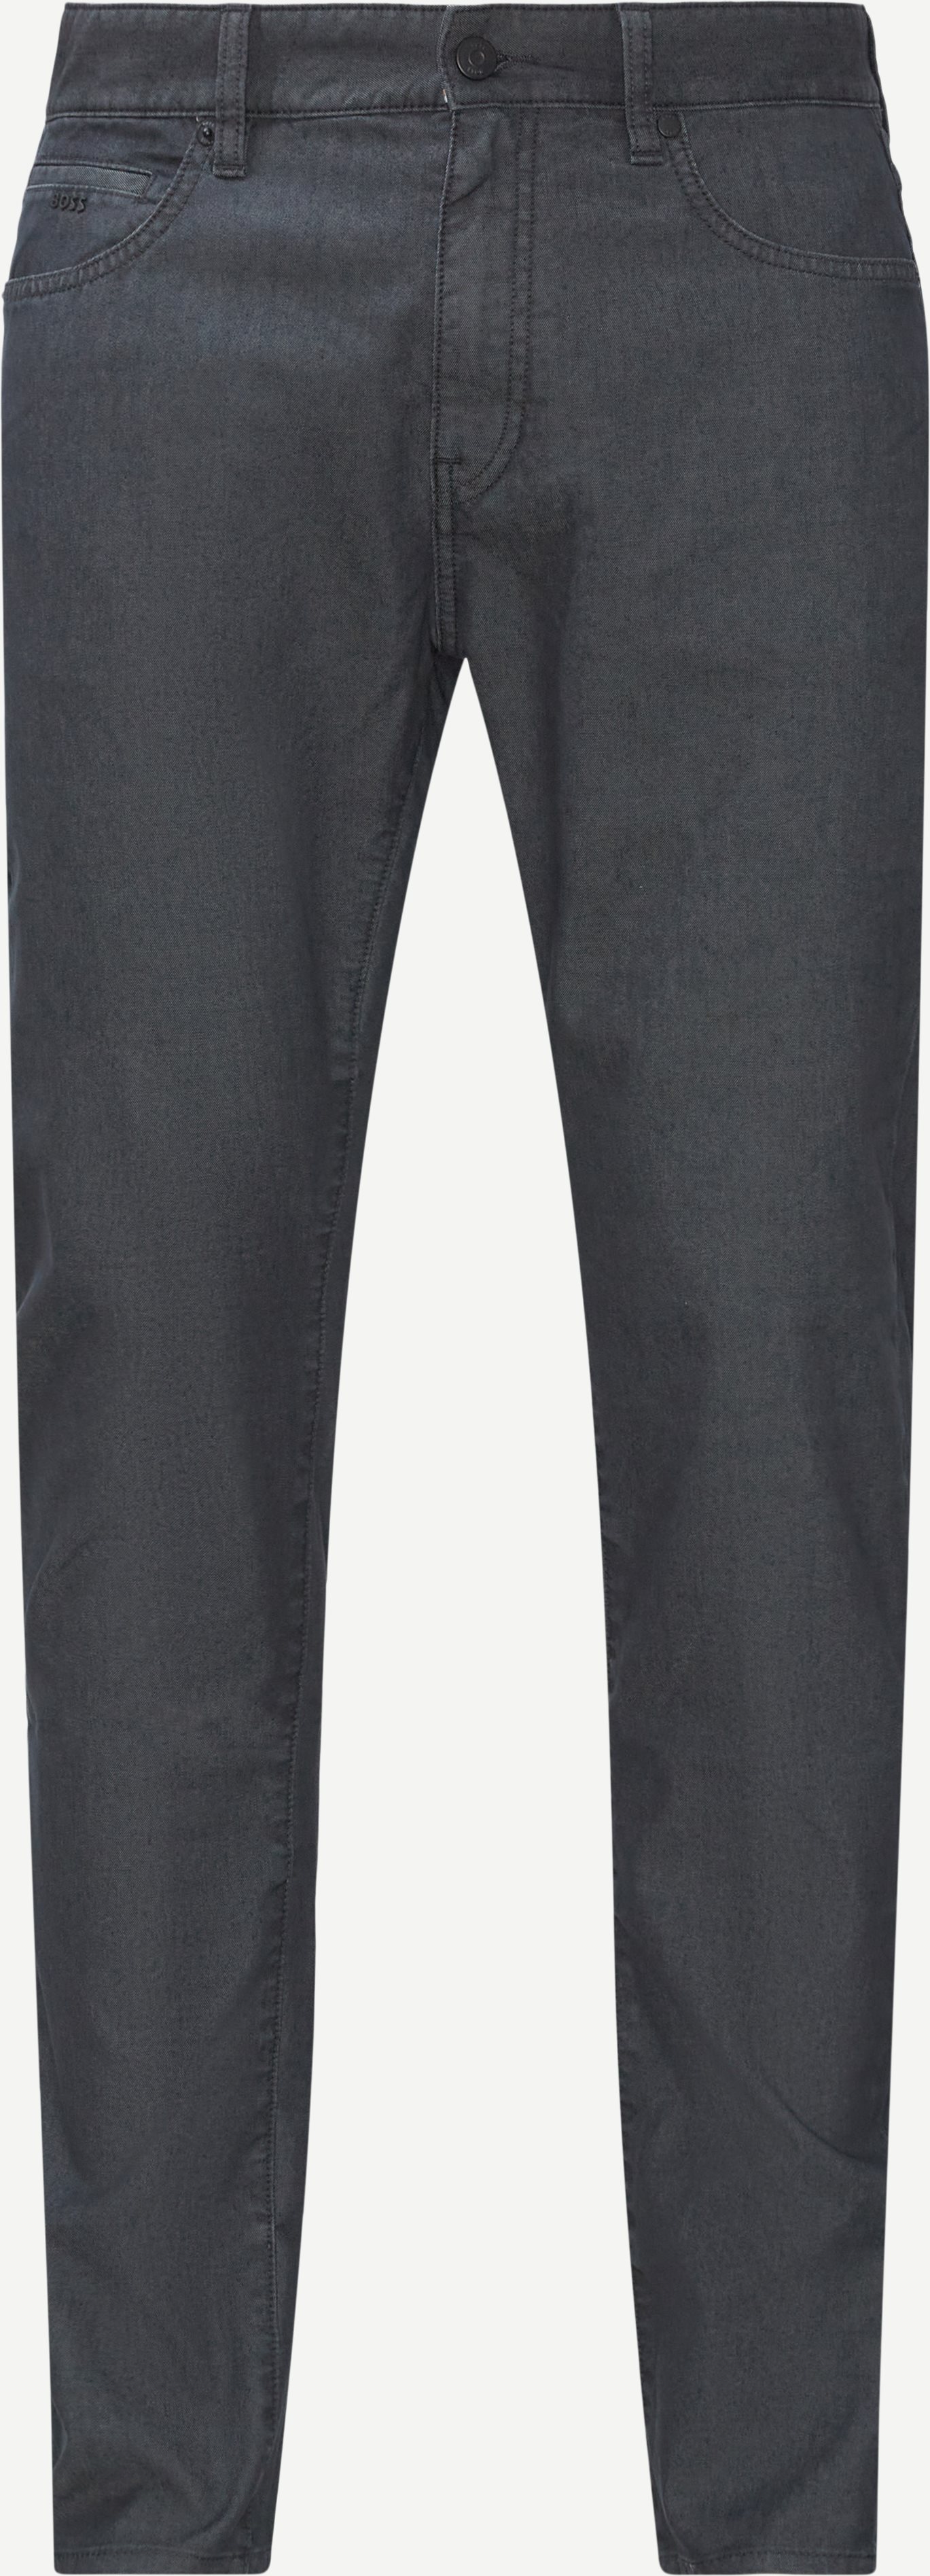 Jeans - Tapered fit - Grå